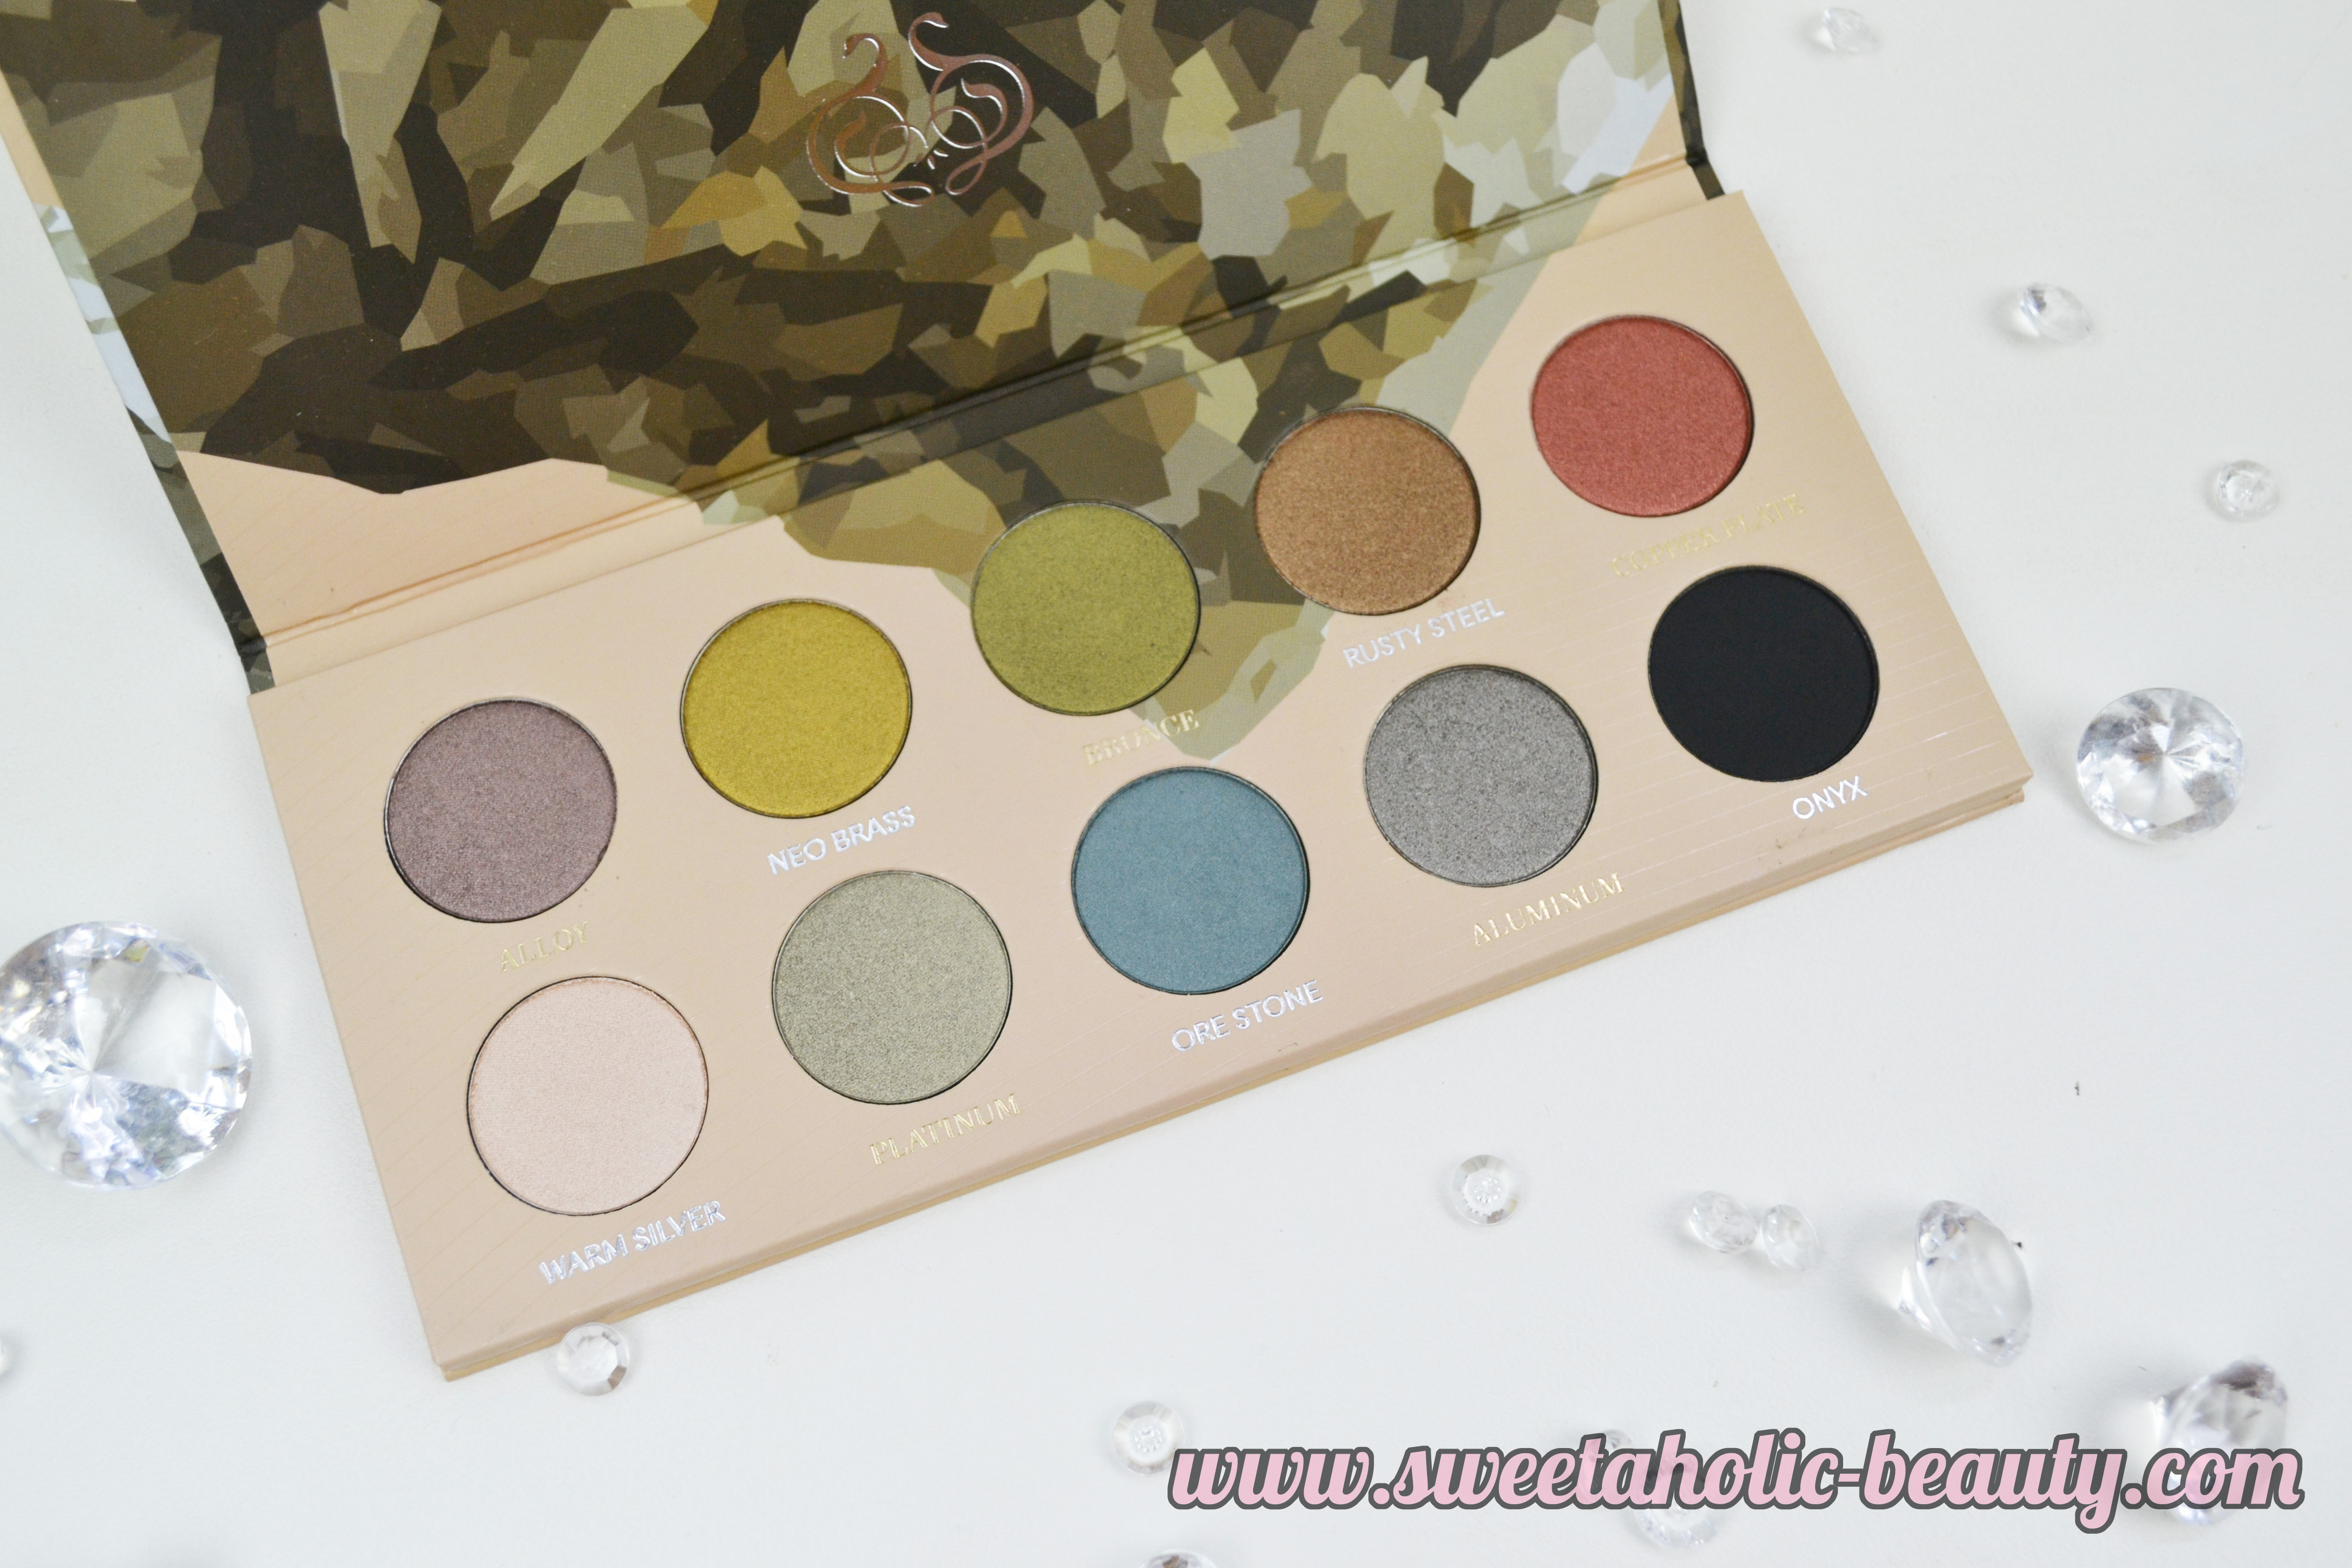 Zoeva Cosmetics Mixed Metals Eyeshadow Palette Review & Swatches - Sweetaholic Beauty